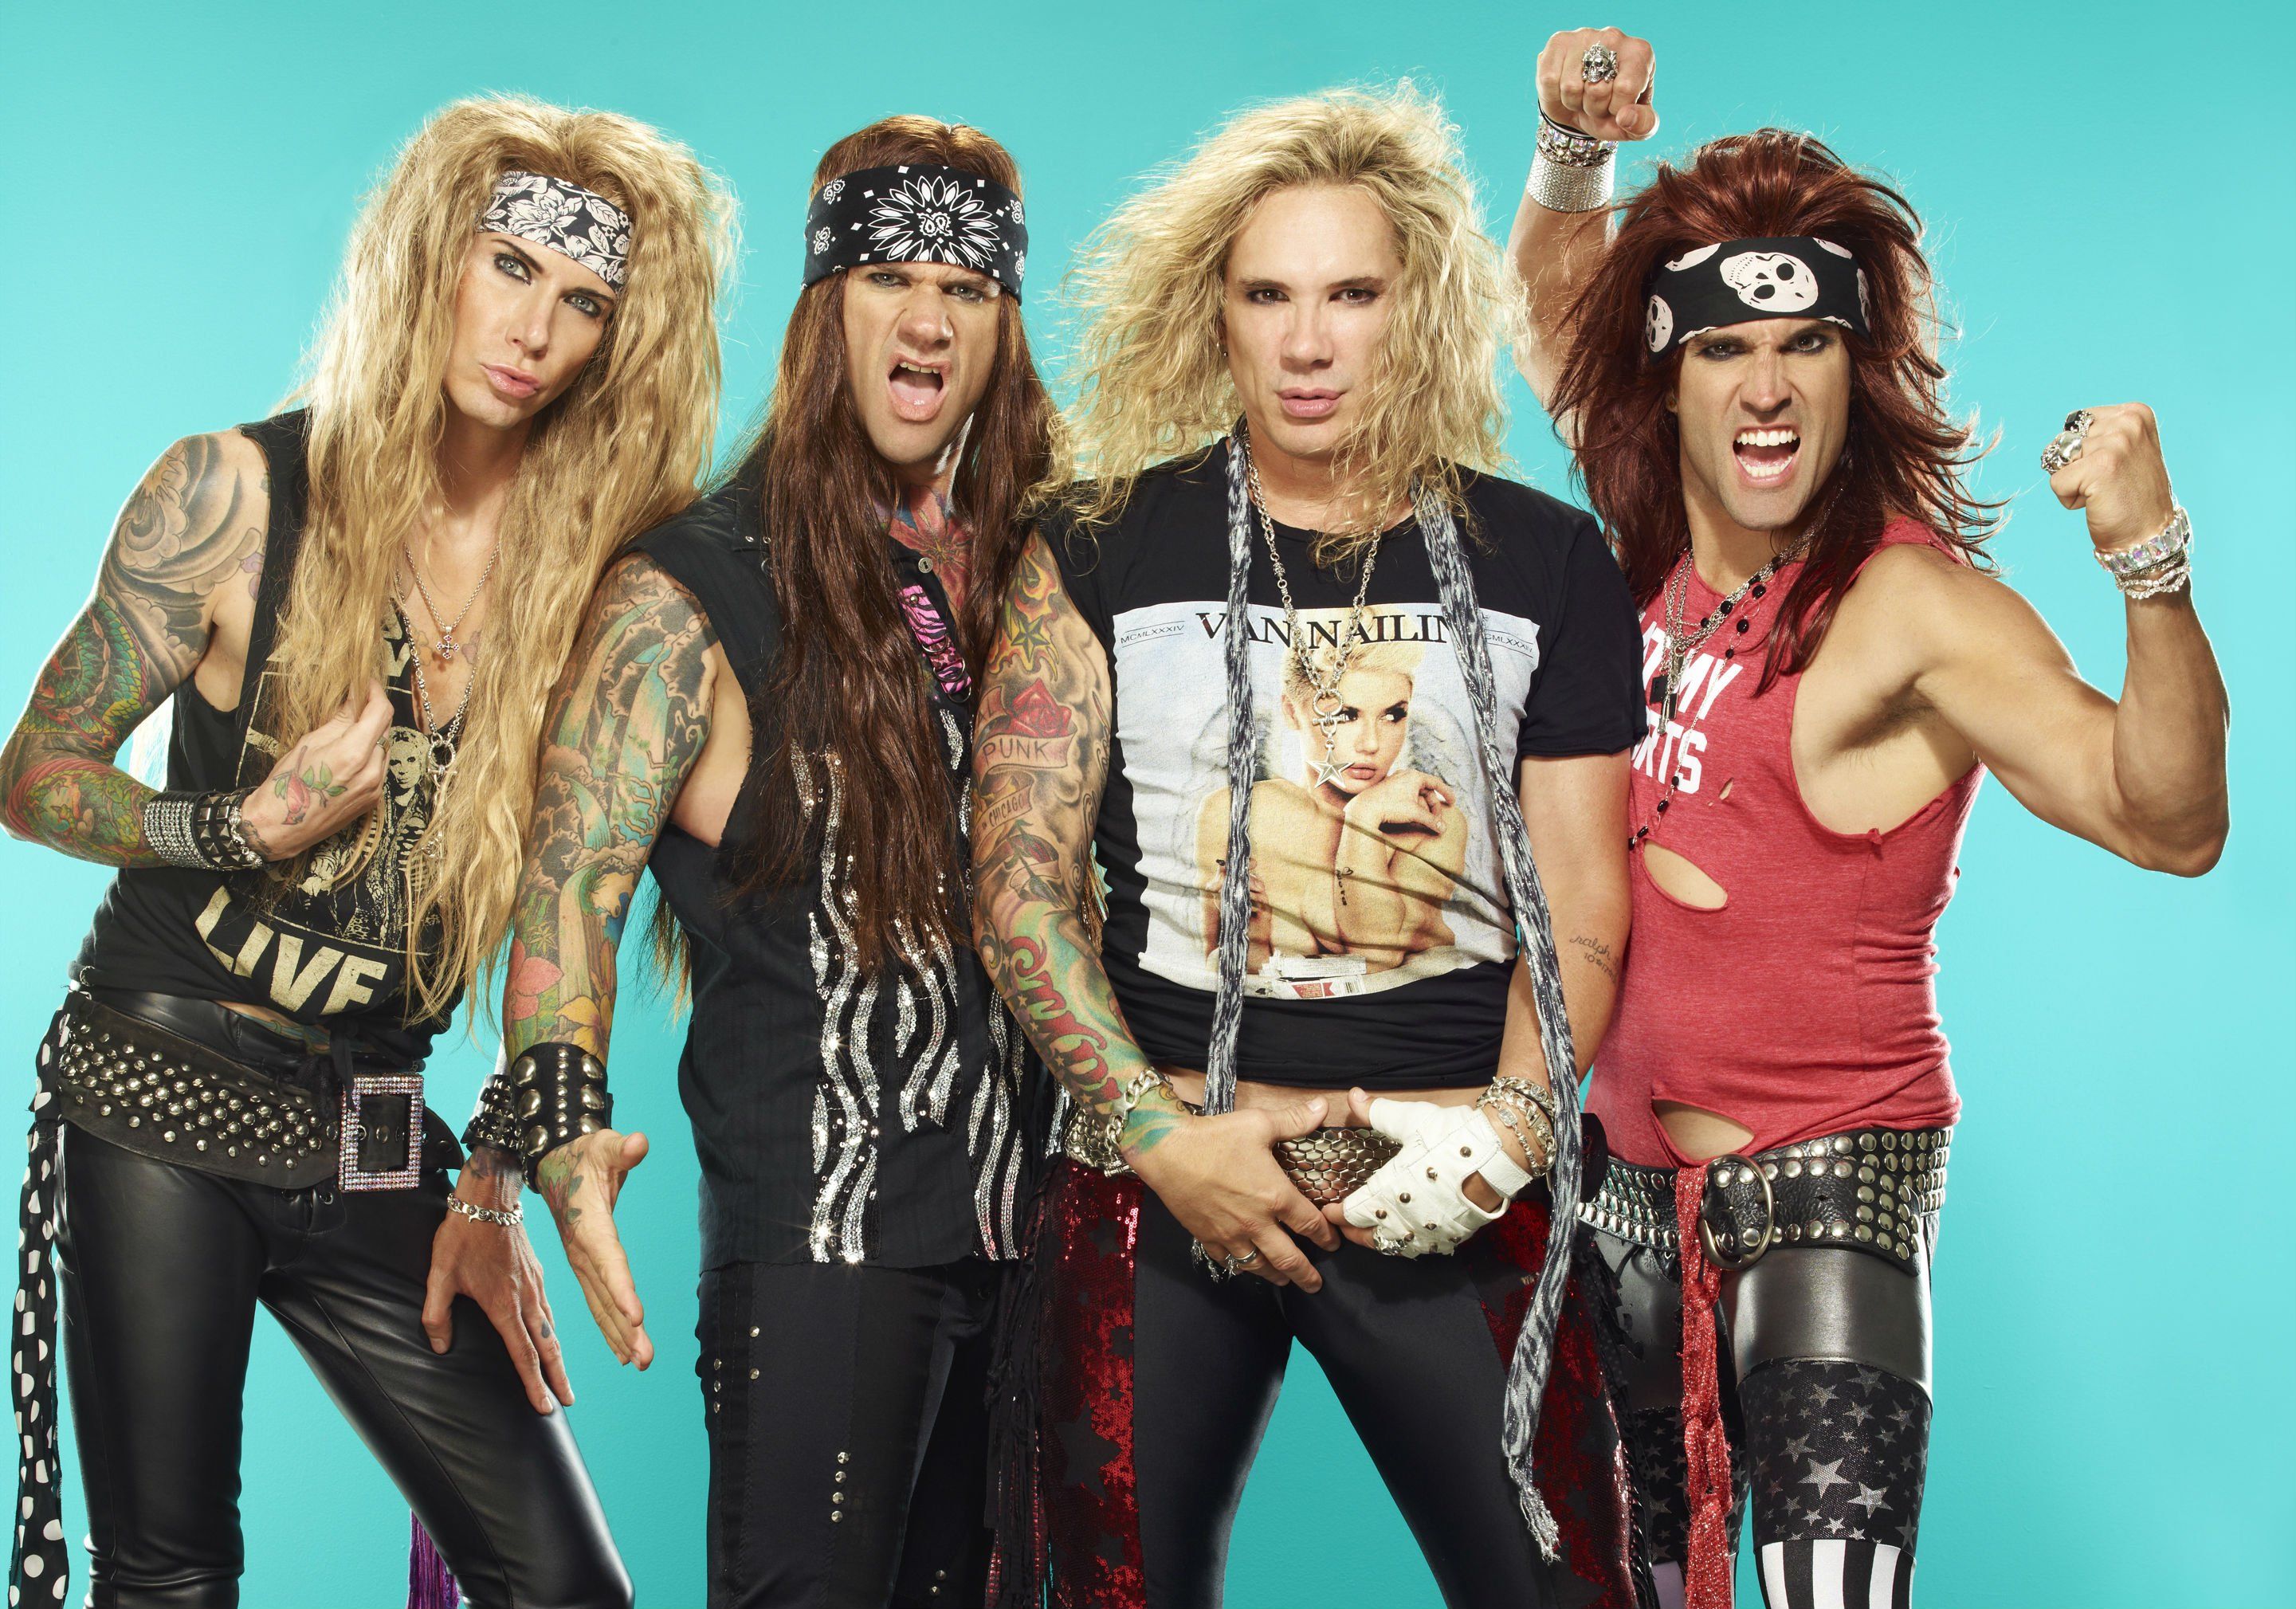 steel, Panther, Hair, Metal, Heavy, Glam, Fz Wallpaper HD / Desktop and Mobile Background